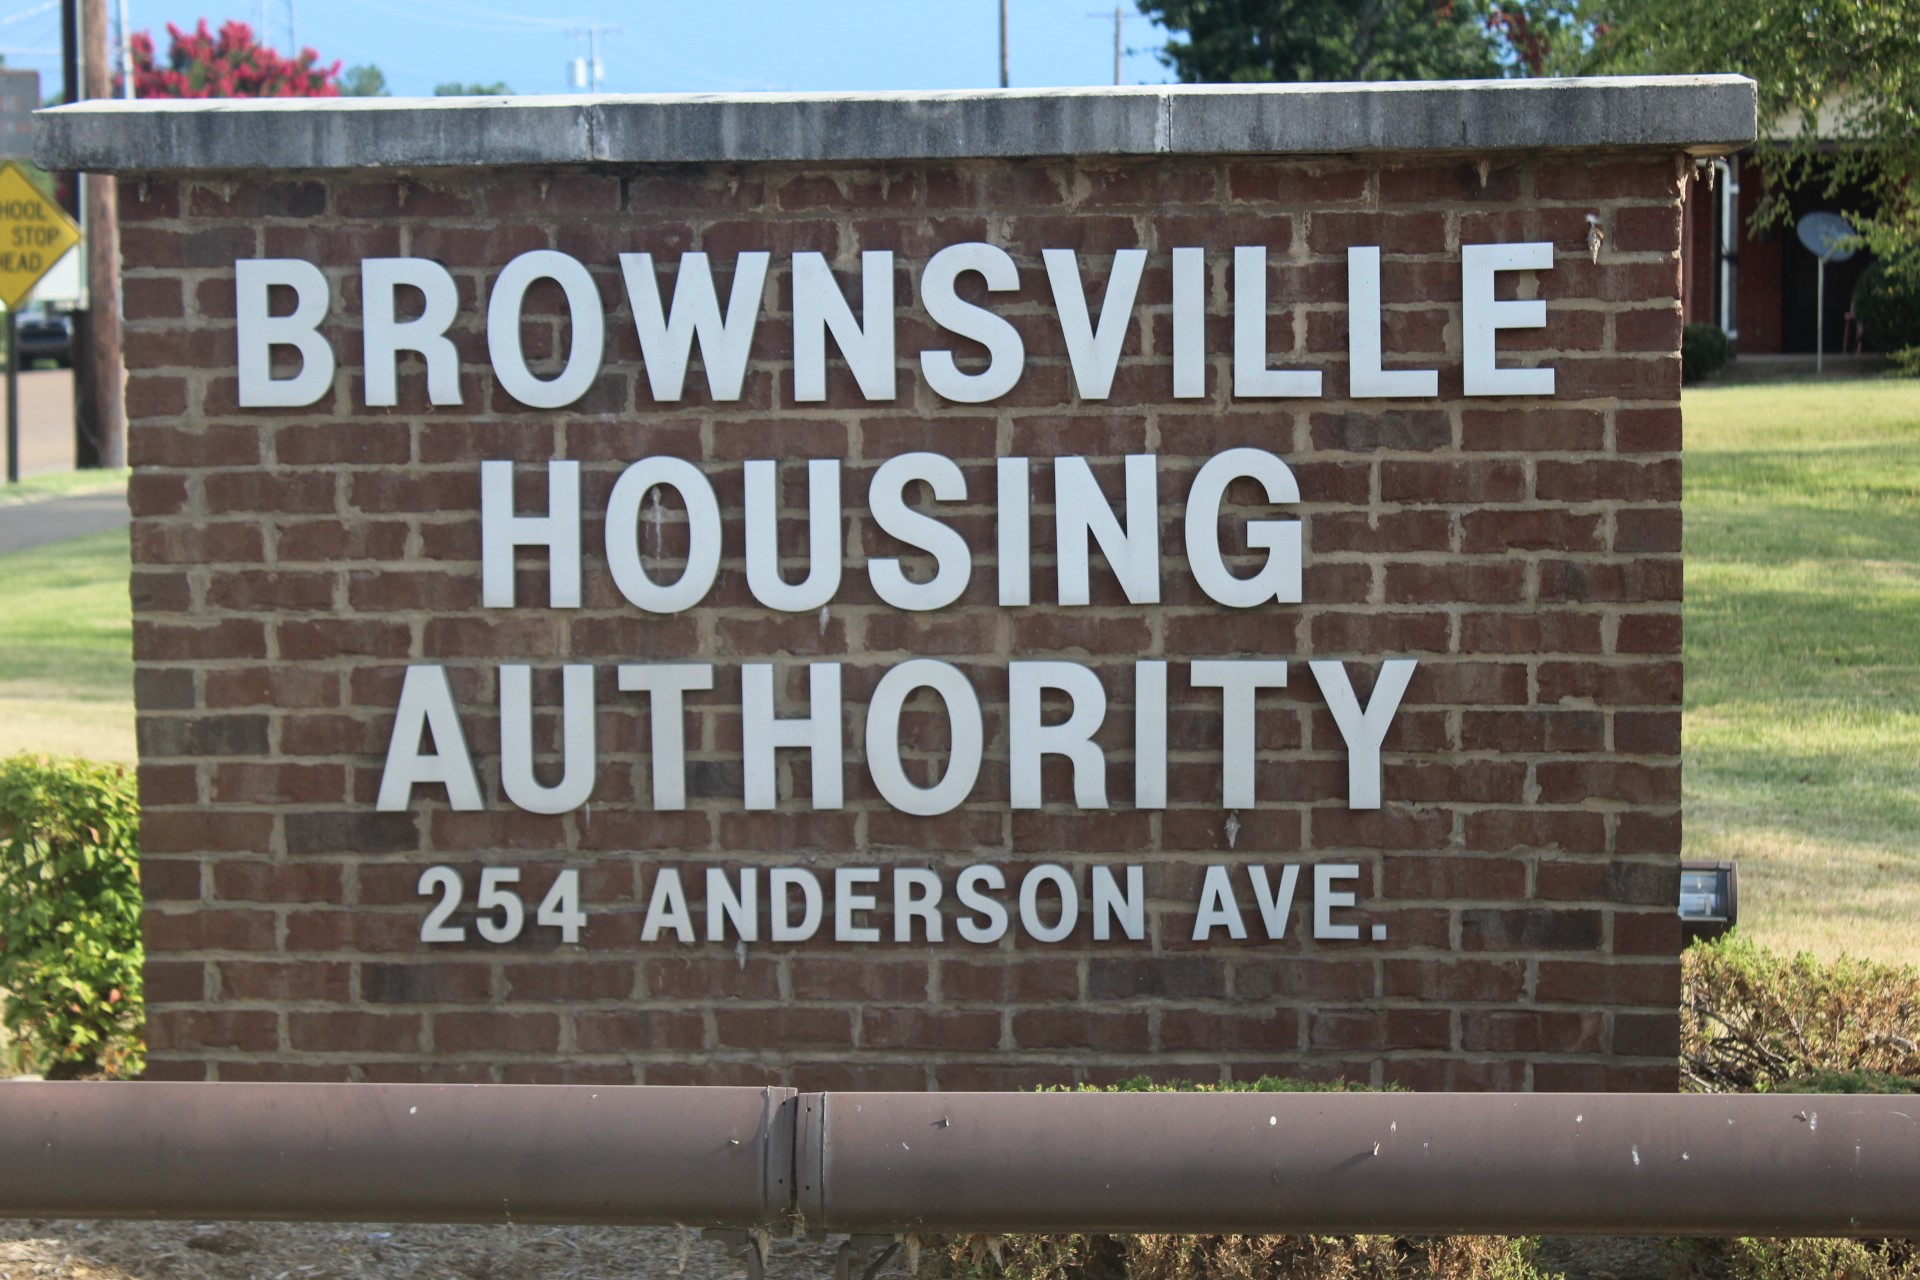 Brownsville Housing Authority